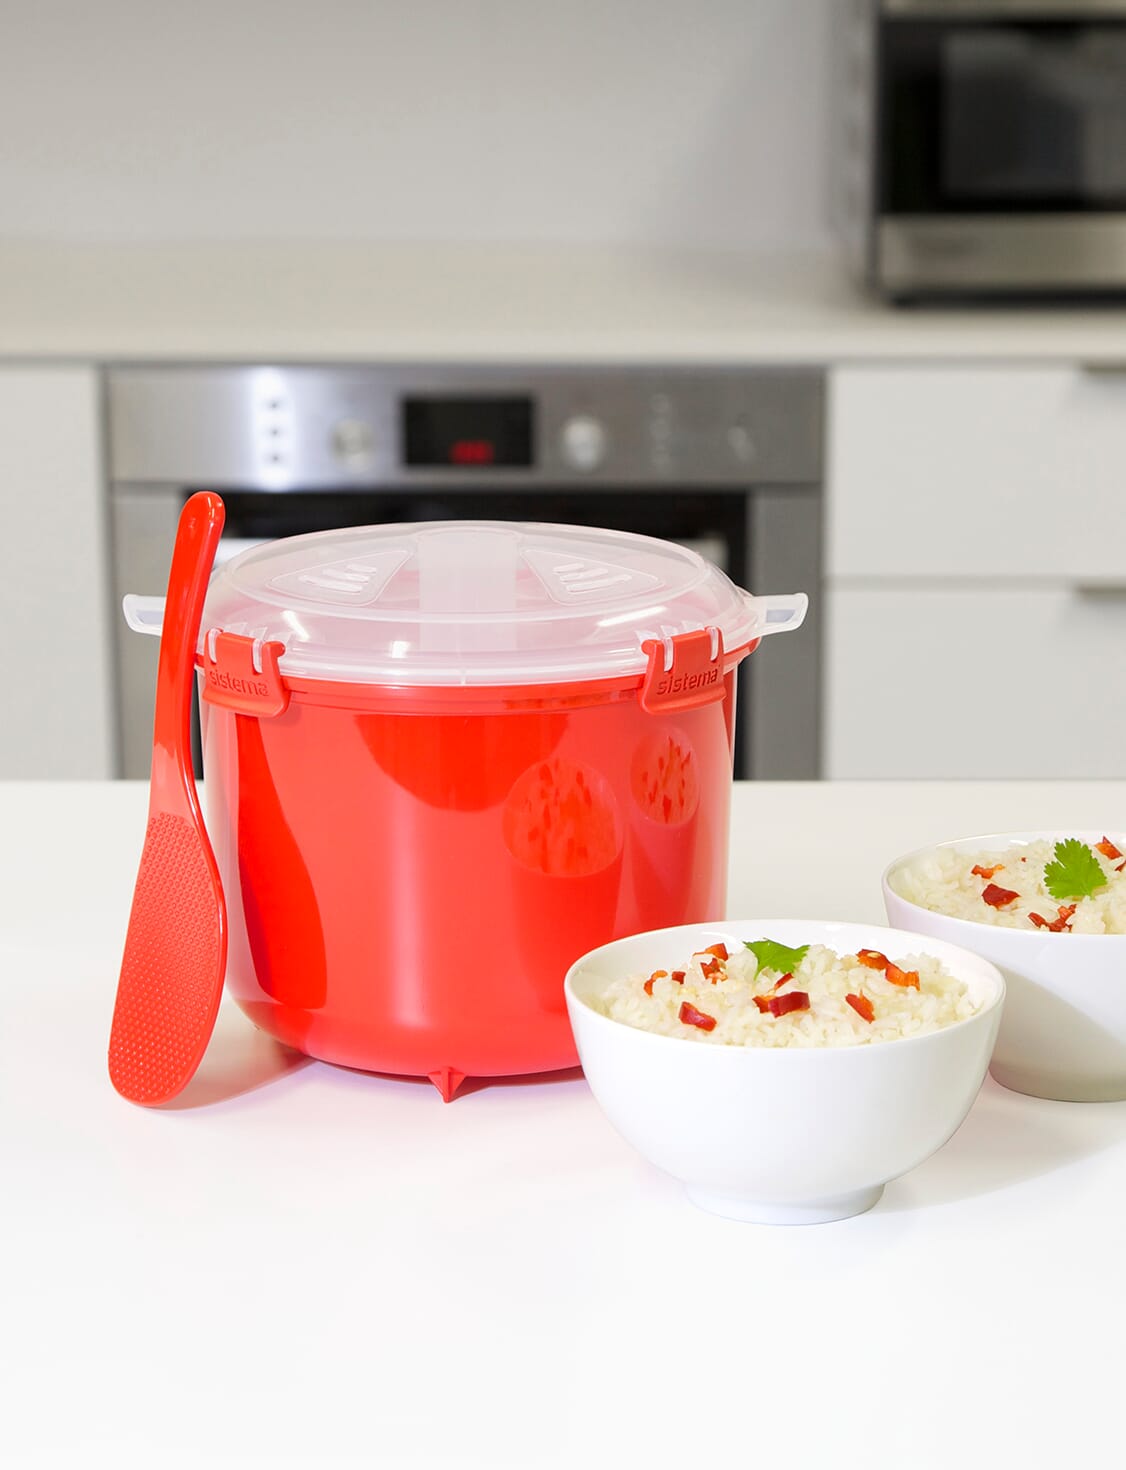 https://stergita.sirv.com/sistema/catalog/product/1/1/1110_ricecooker_food_lifestyle.png?canvas.color=fcfbf8